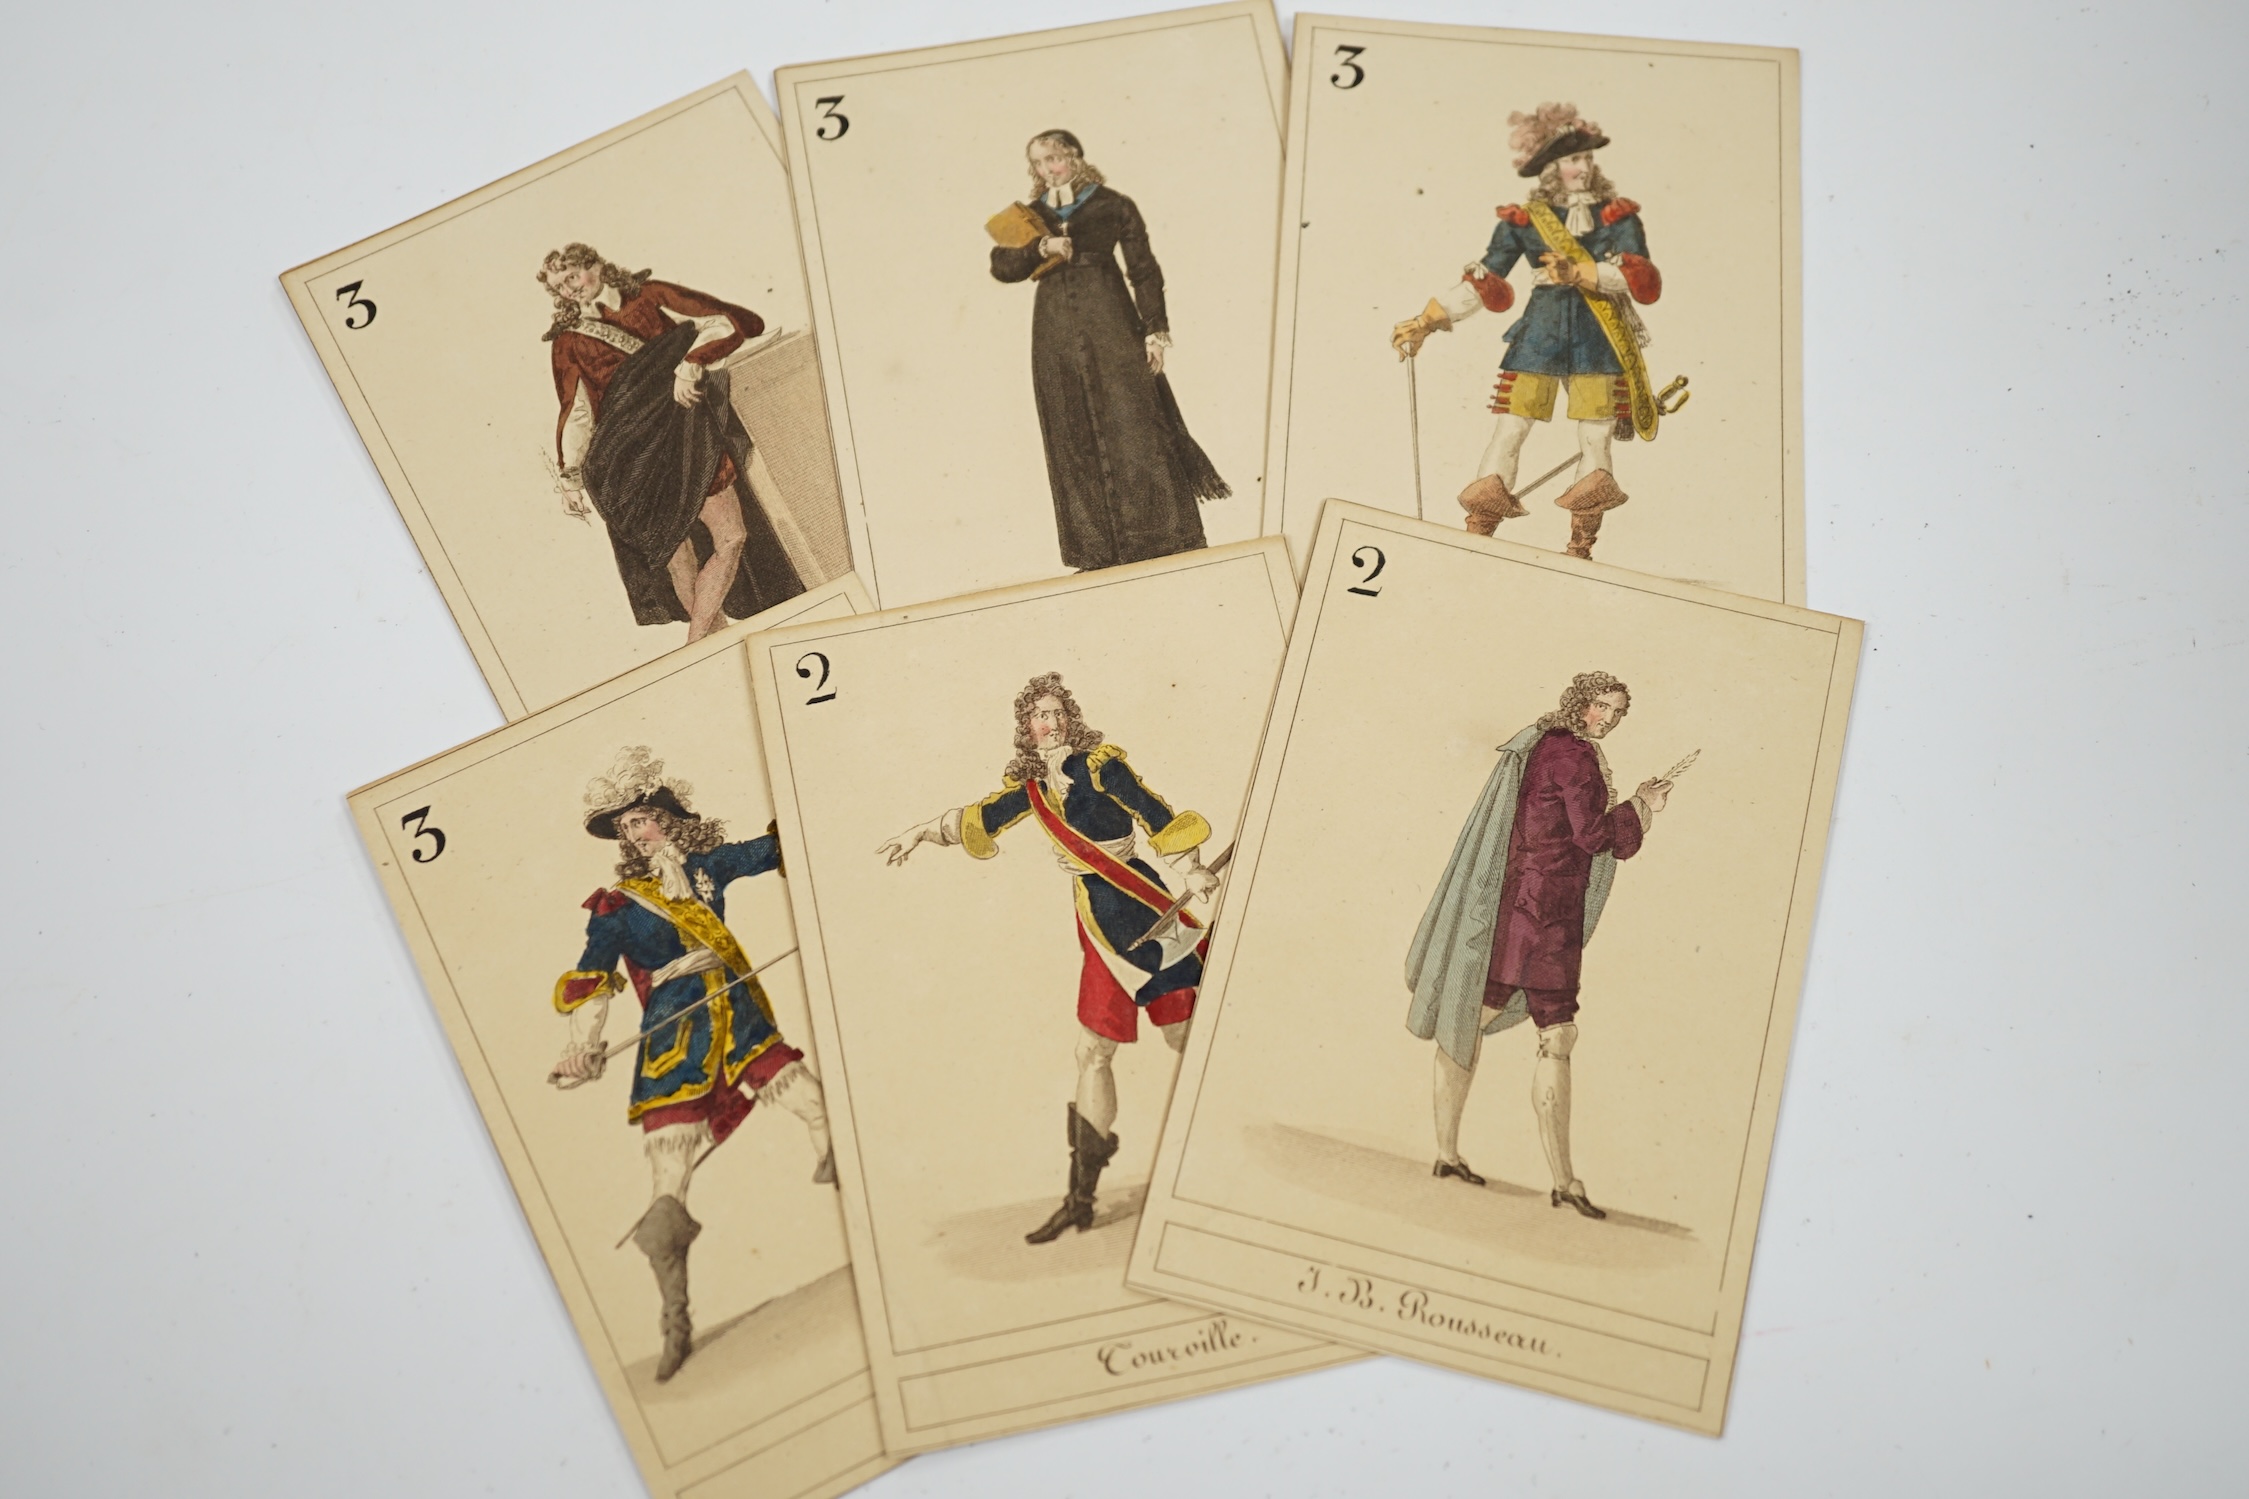 Jeu de Bataille, a set of French playing cards. Condition - poor to fair